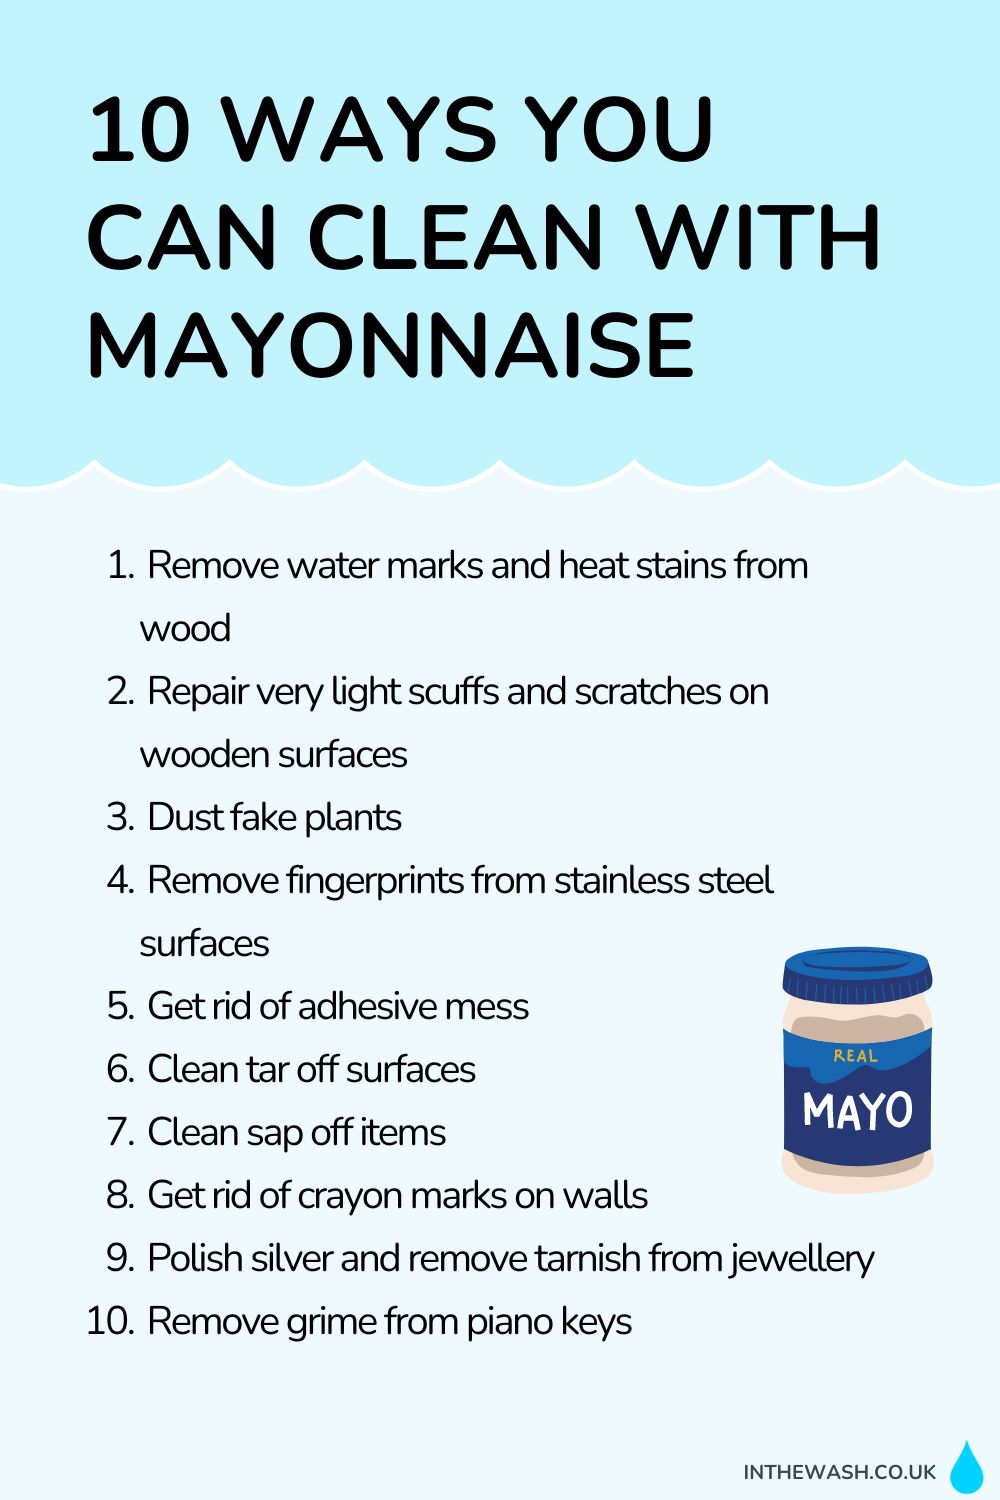 10 Things You Can Clean with Mayonnaise